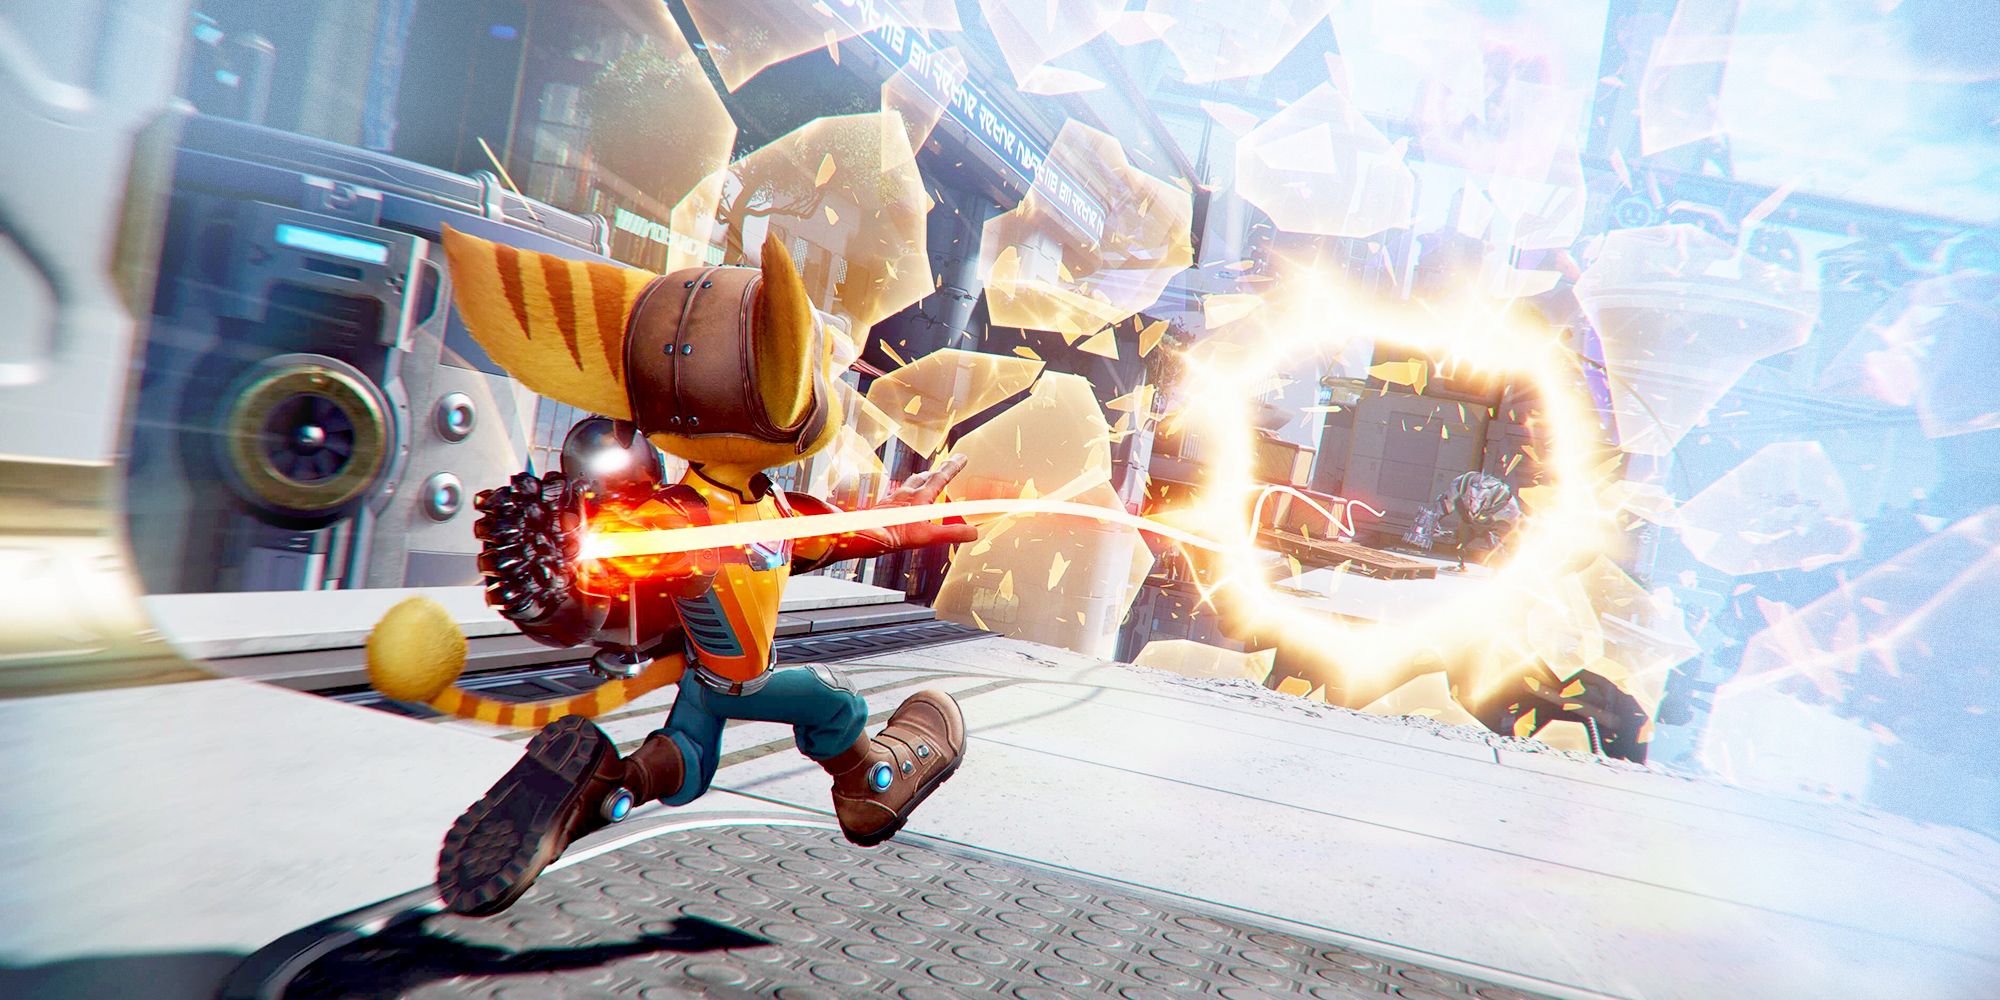 Ratchet & Clank: Rift Apart' takes the PS5 to new heights